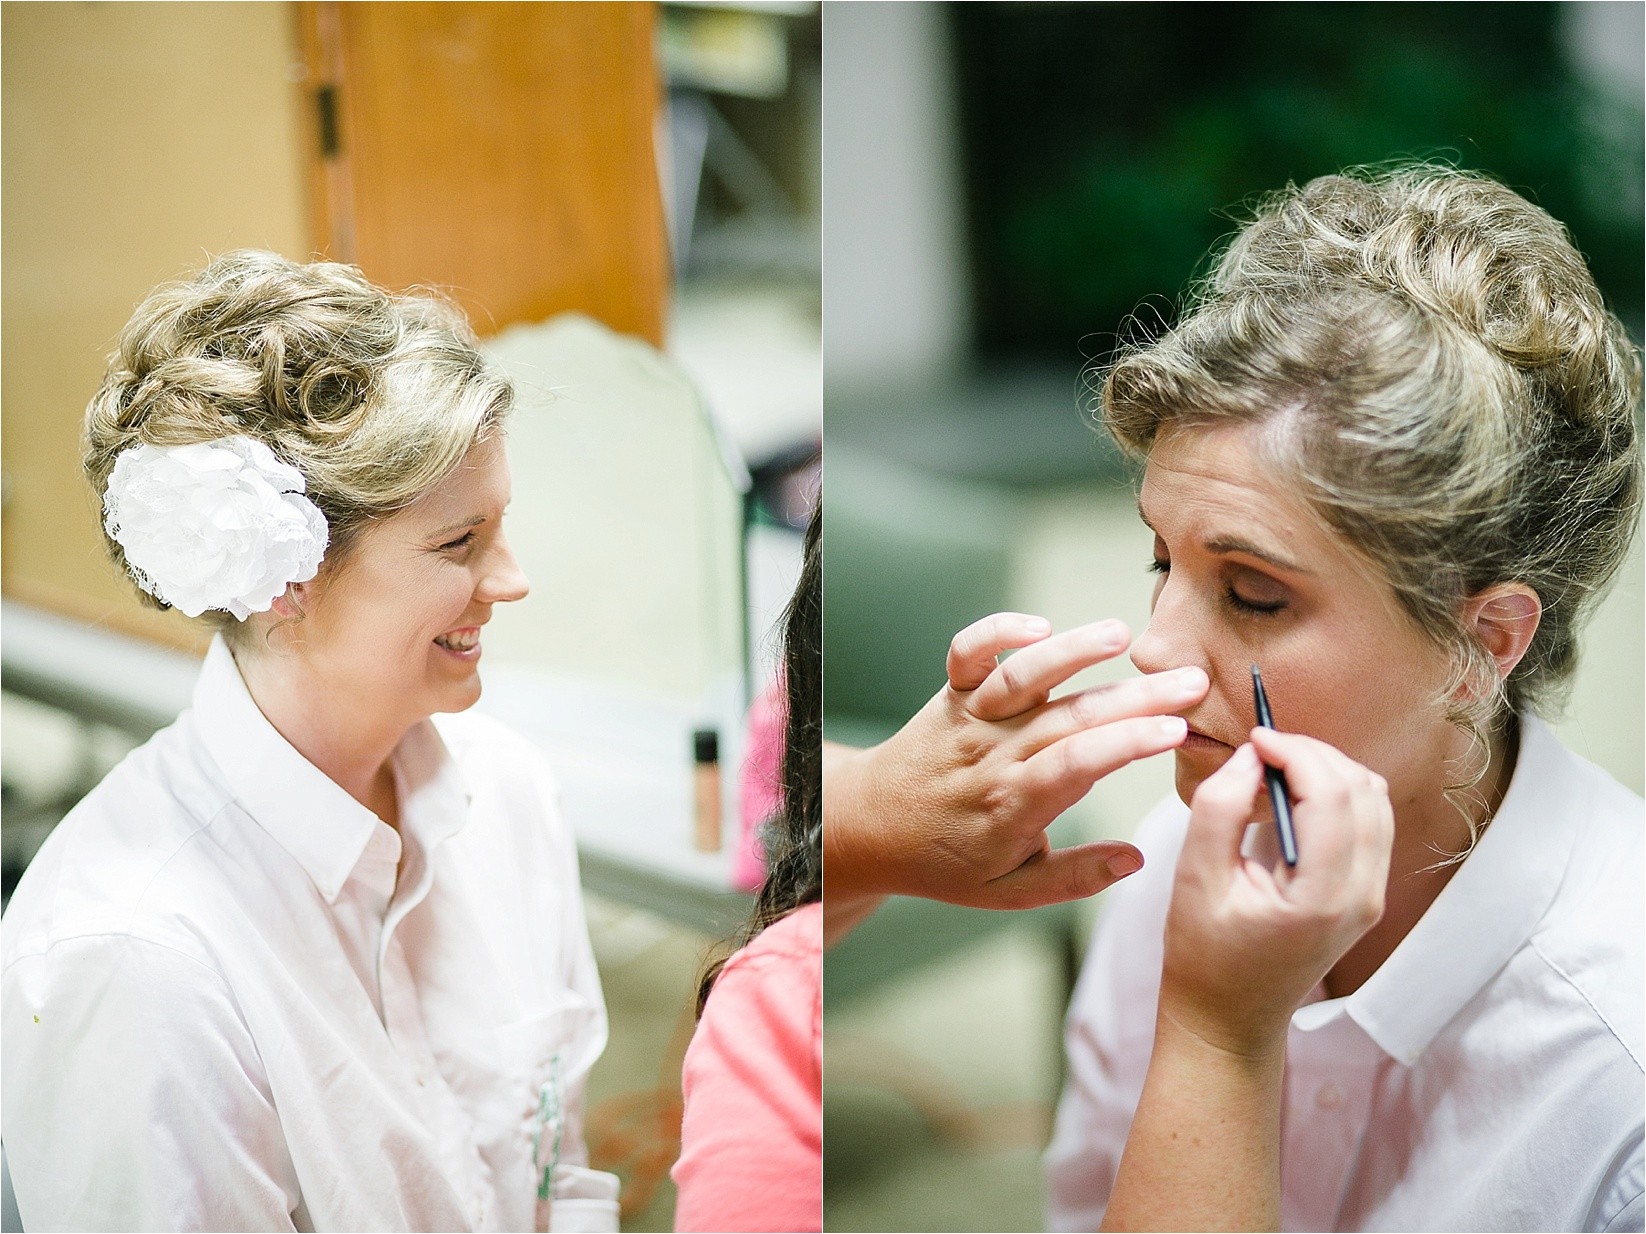 Getting make up on at the davidson college chapel wedding in Davidson north Carolina and the Charles mack citizen center wedding and reception